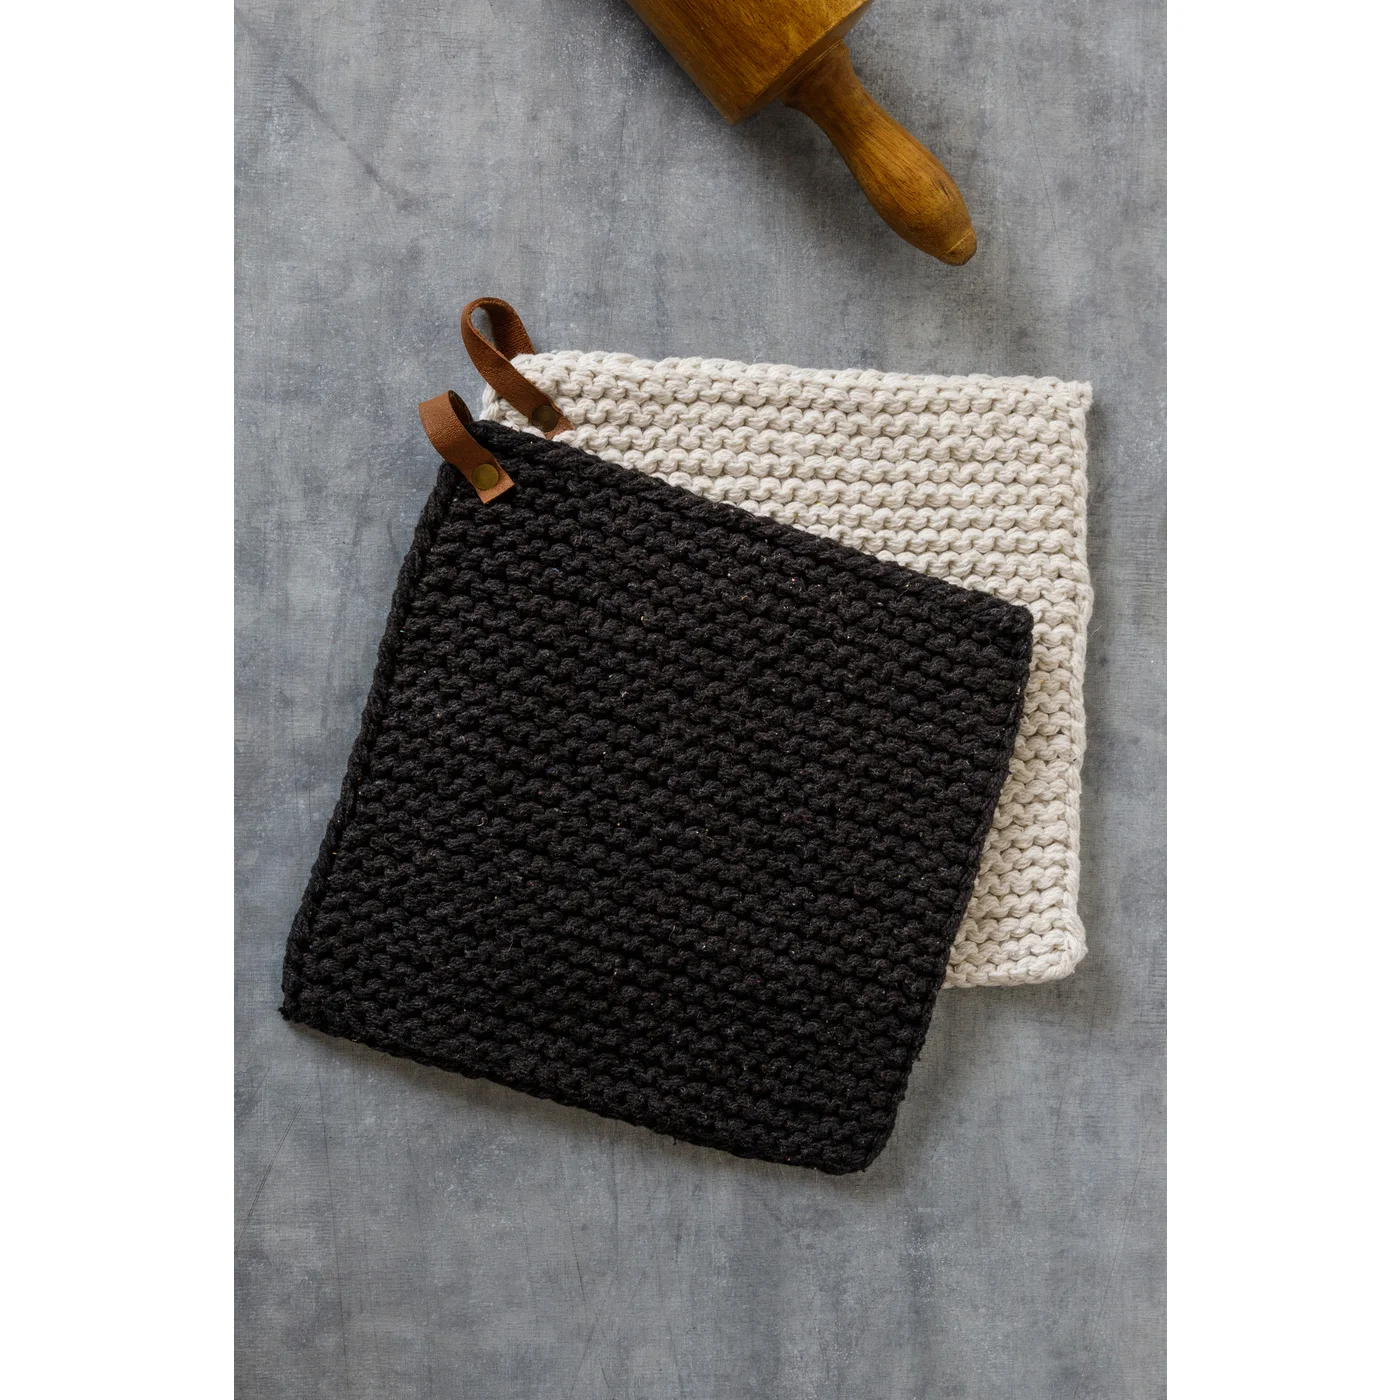 Set of 2 Black and Cream Knitted Pot Holders